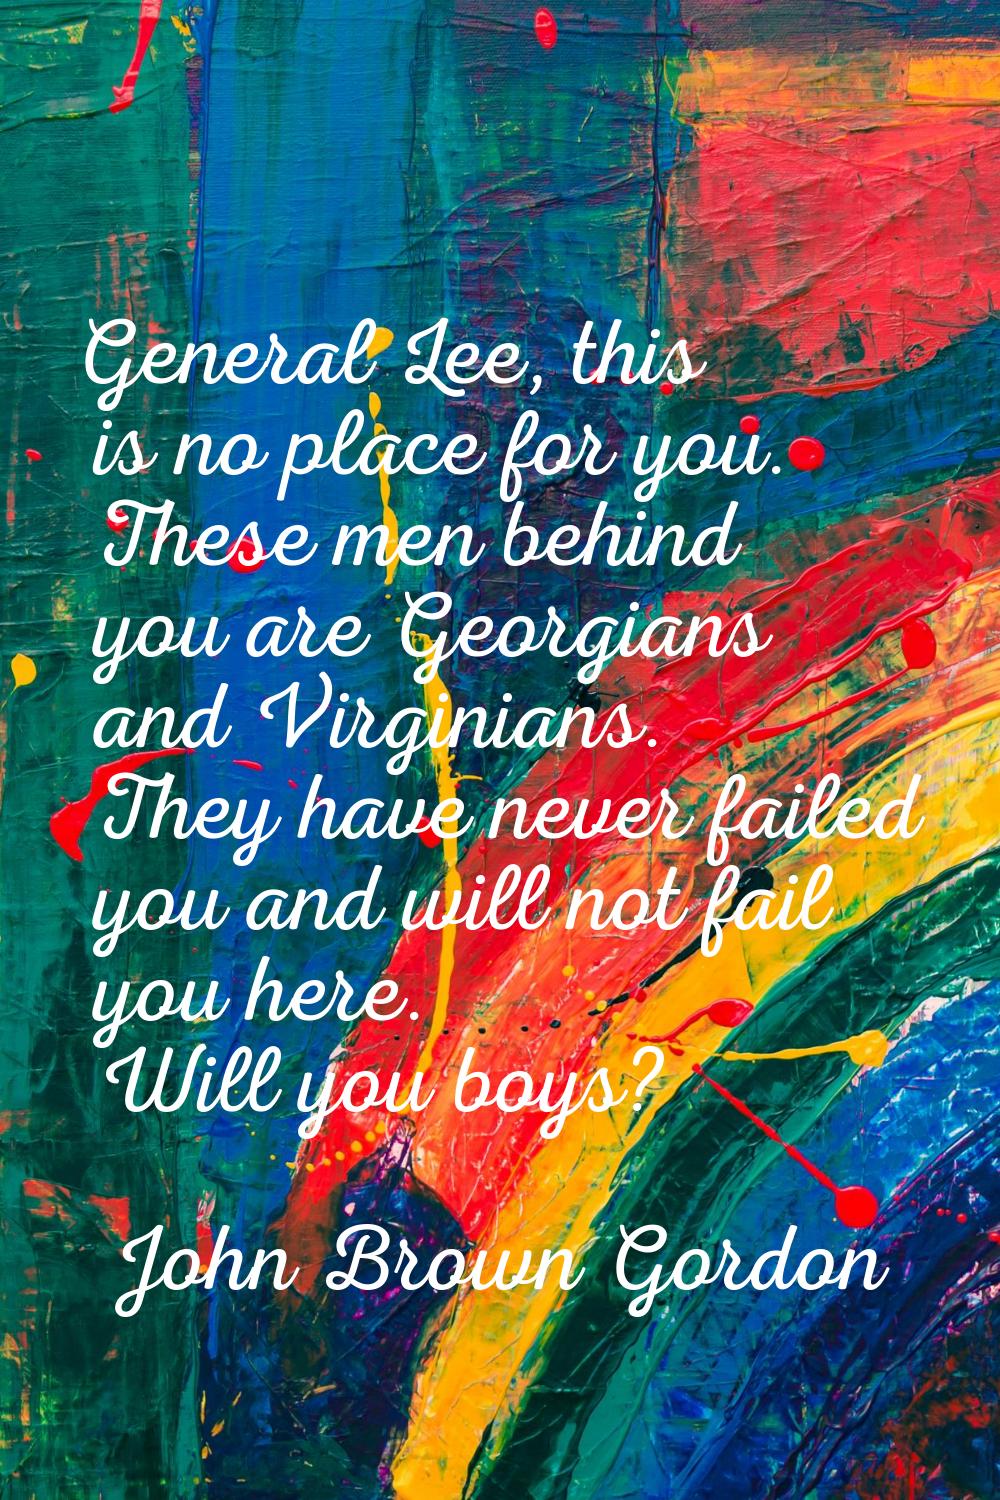 General Lee, this is no place for you. These men behind you are Georgians and Virginians. They have